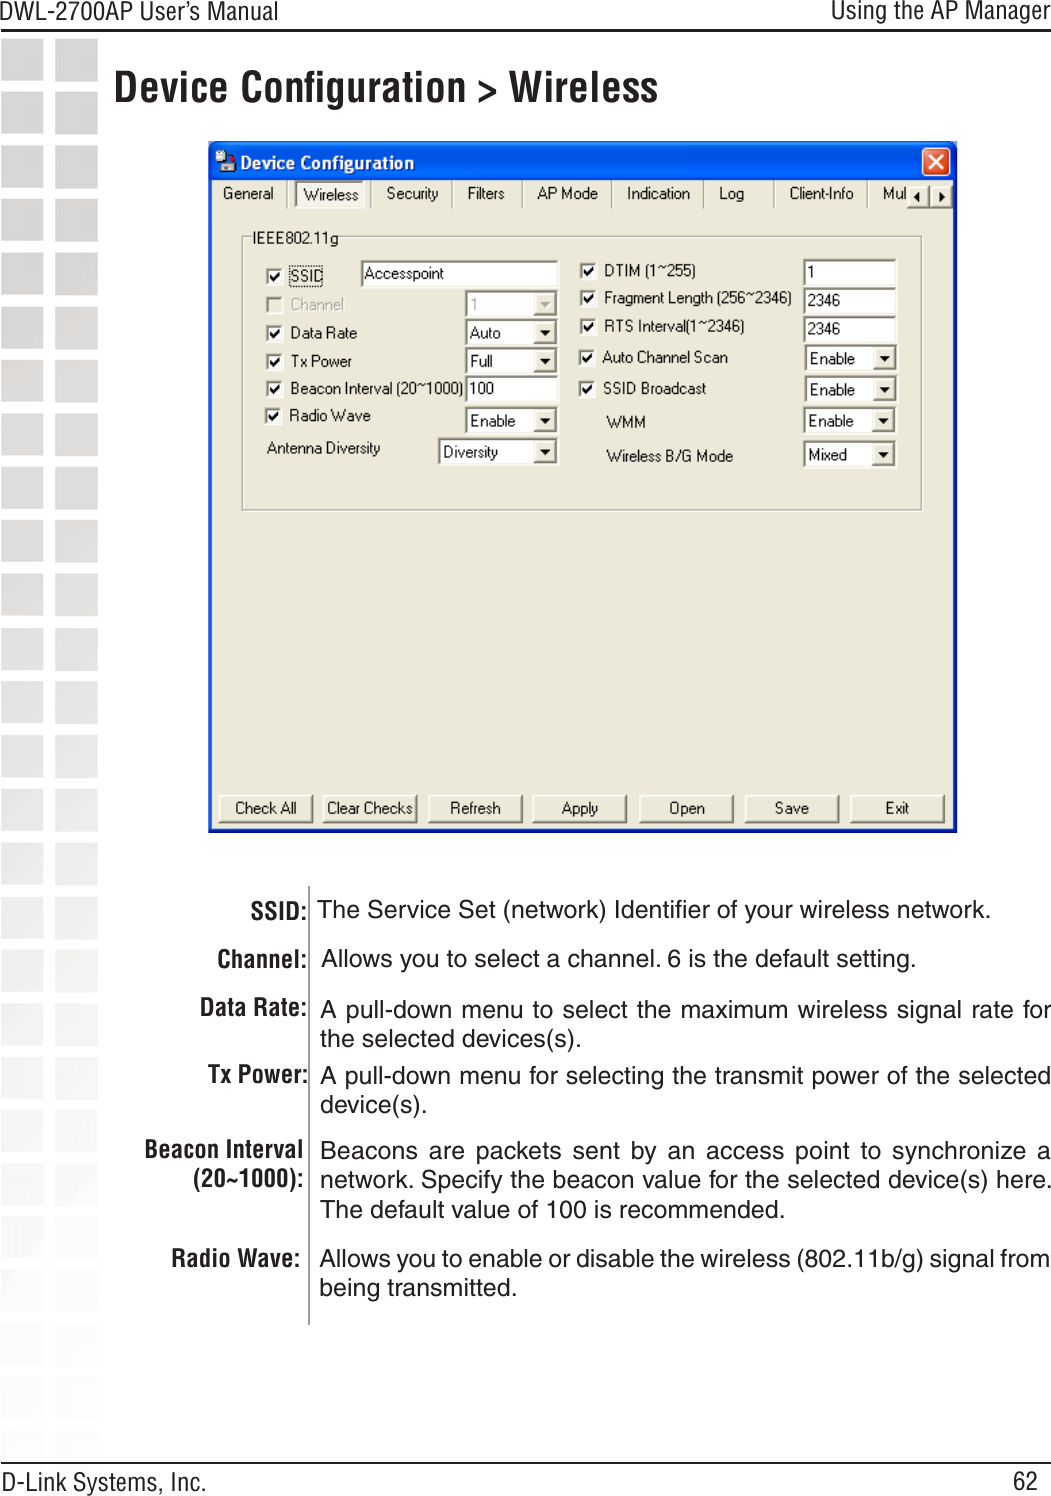 62DWL-2700AP User’s Manual D-Link Systems, Inc.Using the AP ManagerDevice Conﬁguration &gt; Wireless SSID:Channel:Data Rate:  A pull-down menu to select the maximum wireless signal rate for the selected devices(s).A pull-down menu for selecting the transmit power of the selected device(s).Tx Power:Beacons  are  packets  sent  by  an  access  point  to  synchronize  a network. Specify the beacon value for the selected device(s) here. The default value of 100 is recommended.Beacon Interval (20~1000):The Service Set (network) Identiﬁer of your wireless network.  Allows you to select a channel. 6 is the default setting. Radio Wave: Allows you to enable or disable the wireless (802.11b/g) signal from being transmitted.